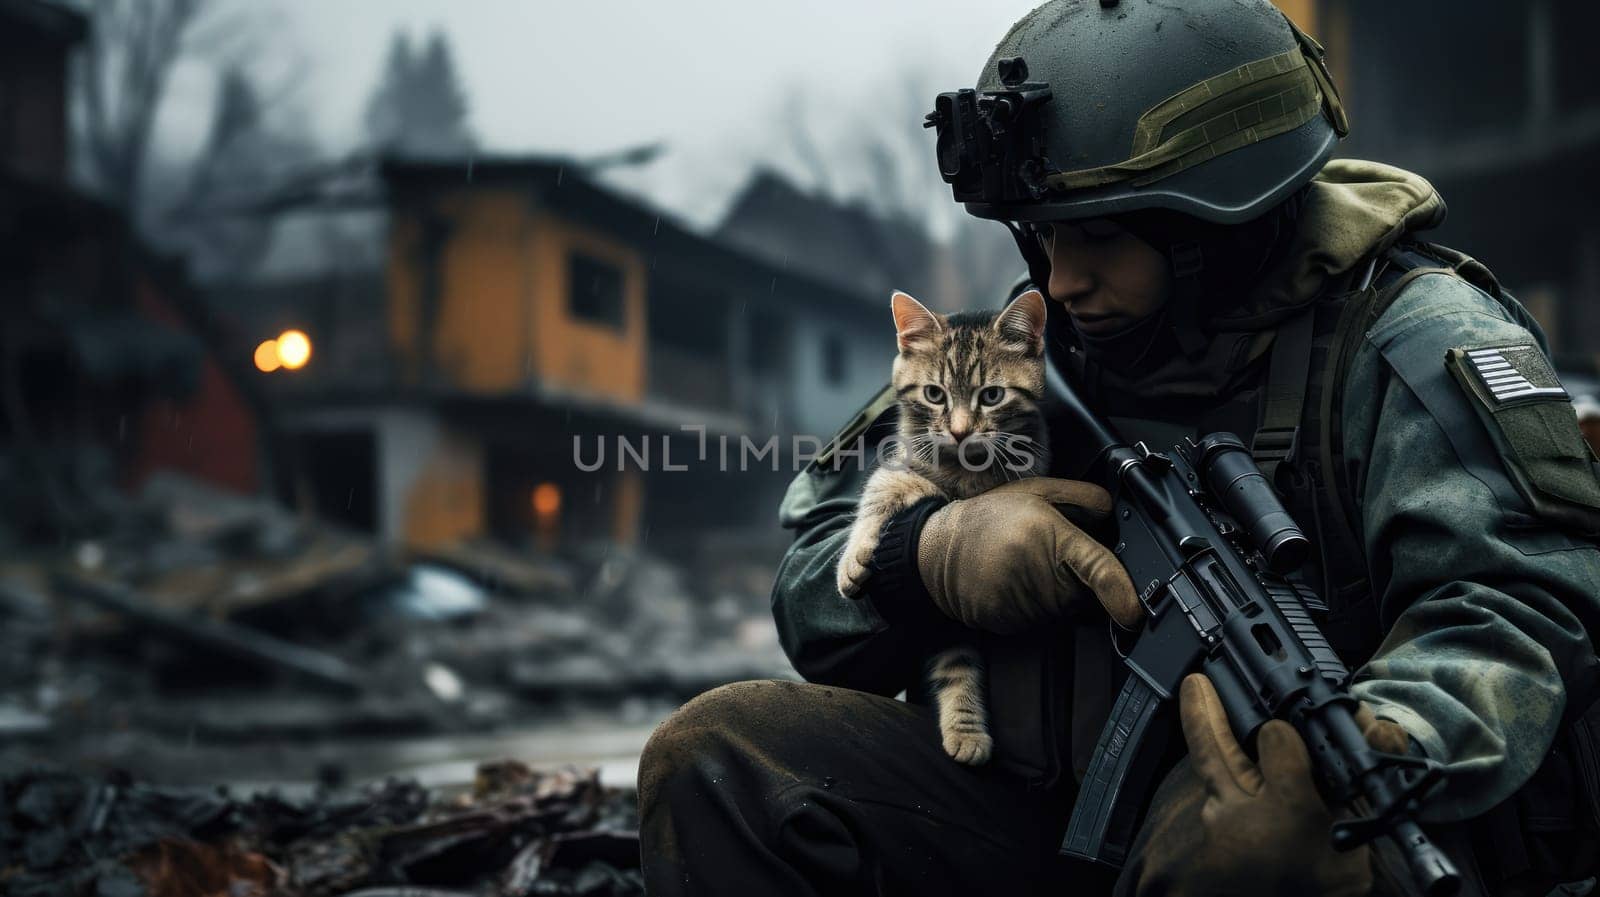 War and domestic animals. Portrait of a military man with a gun holding a kitten in his arms during the warfare